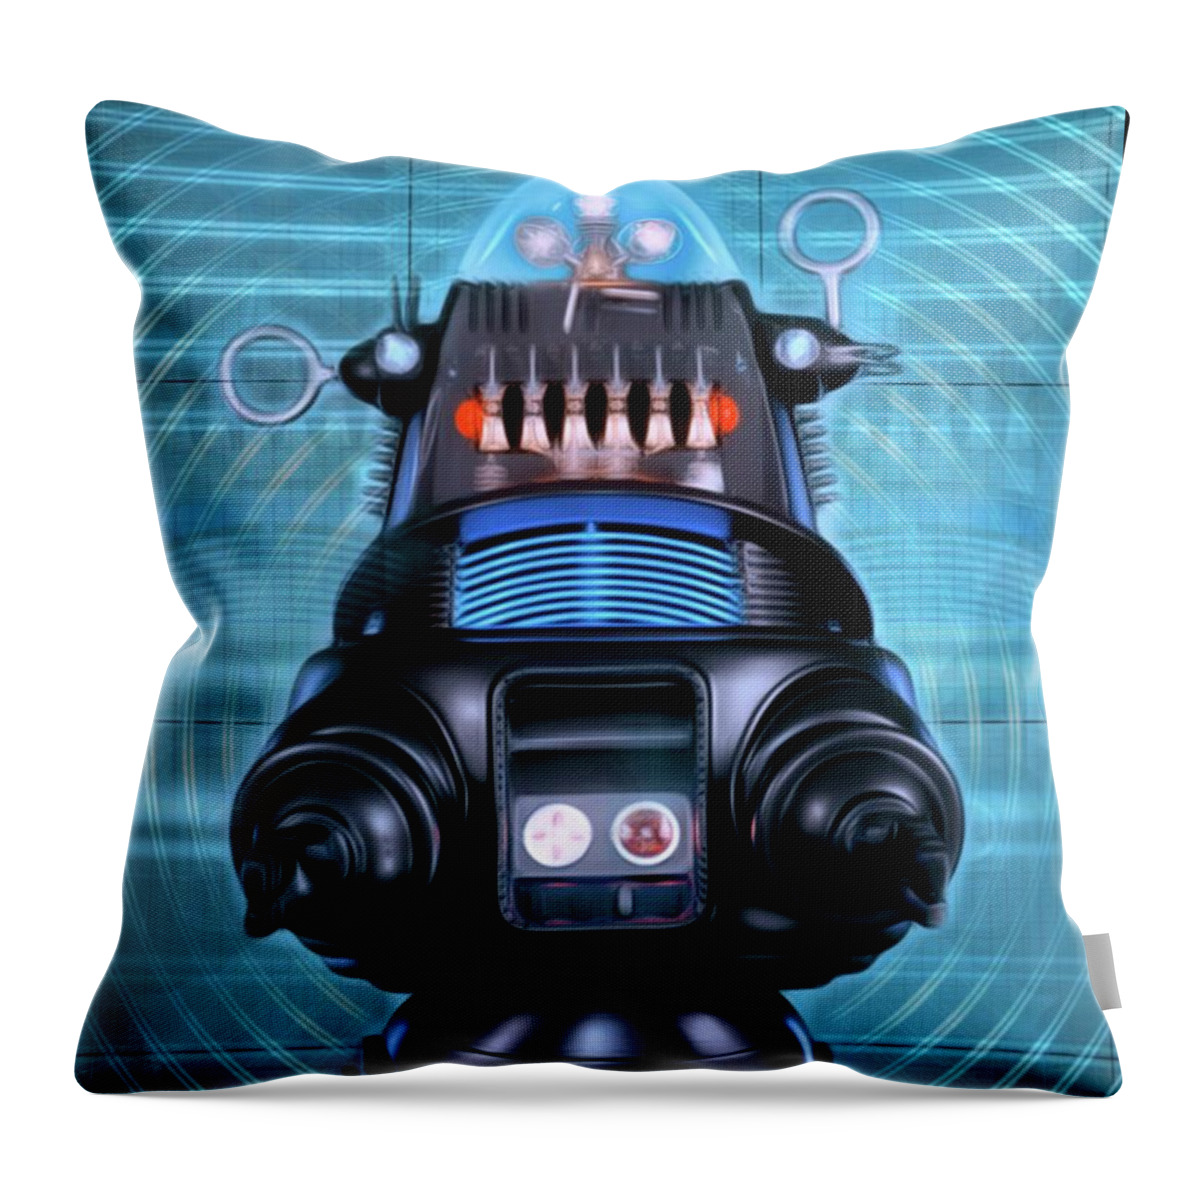 Robbie Throw Pillow featuring the digital art Robbie the Robot, Forbidden Planet by Esoterica Art Agency